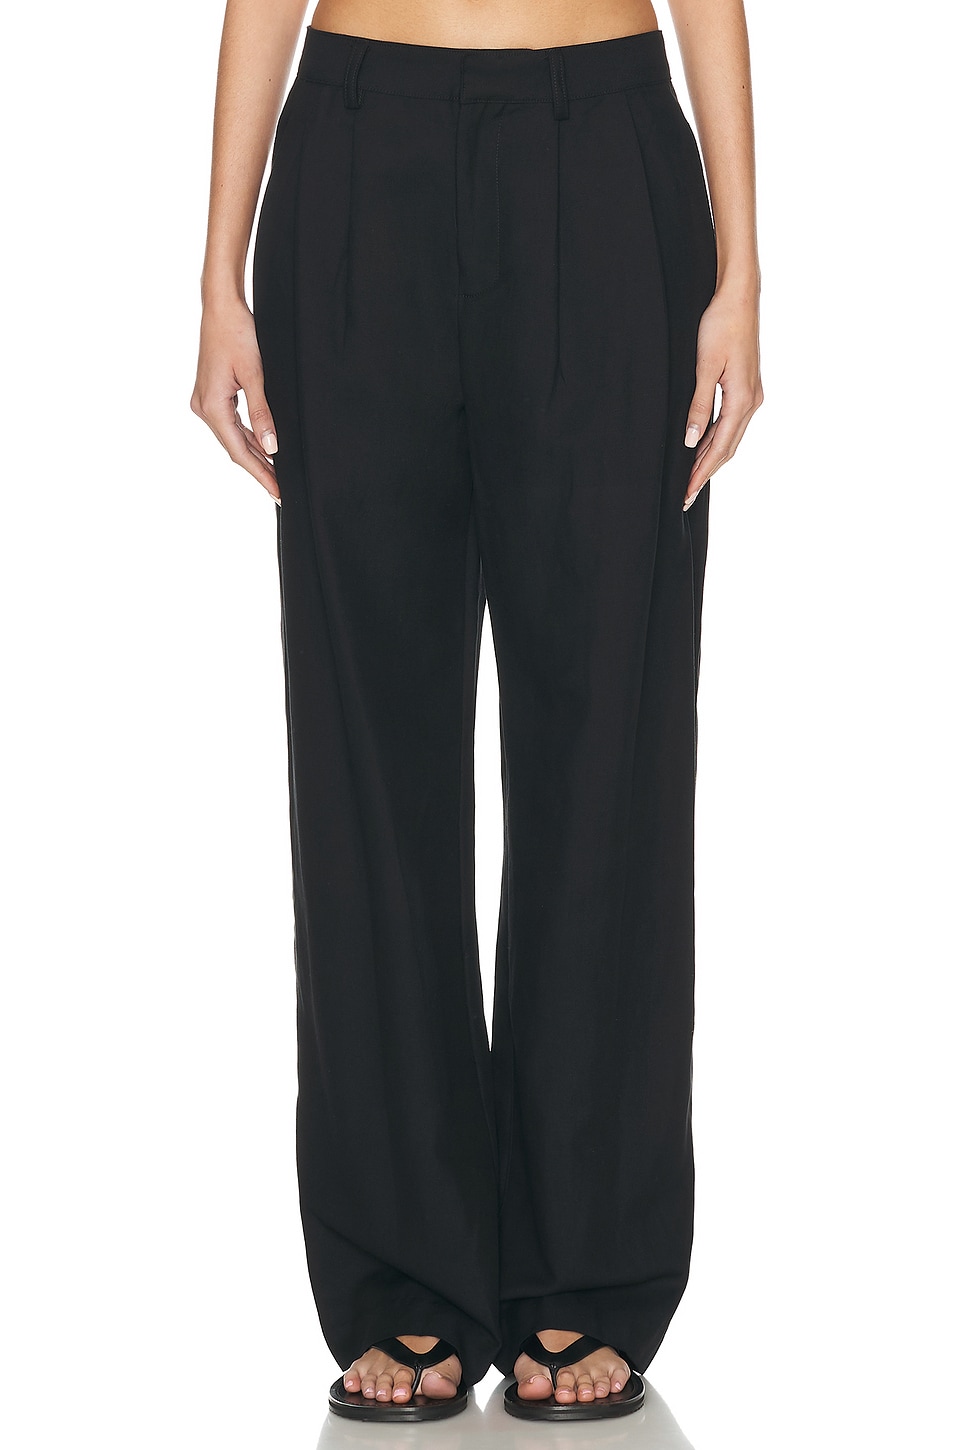 Image 1 of Enza Costa Twill Sartorial Pant in Black